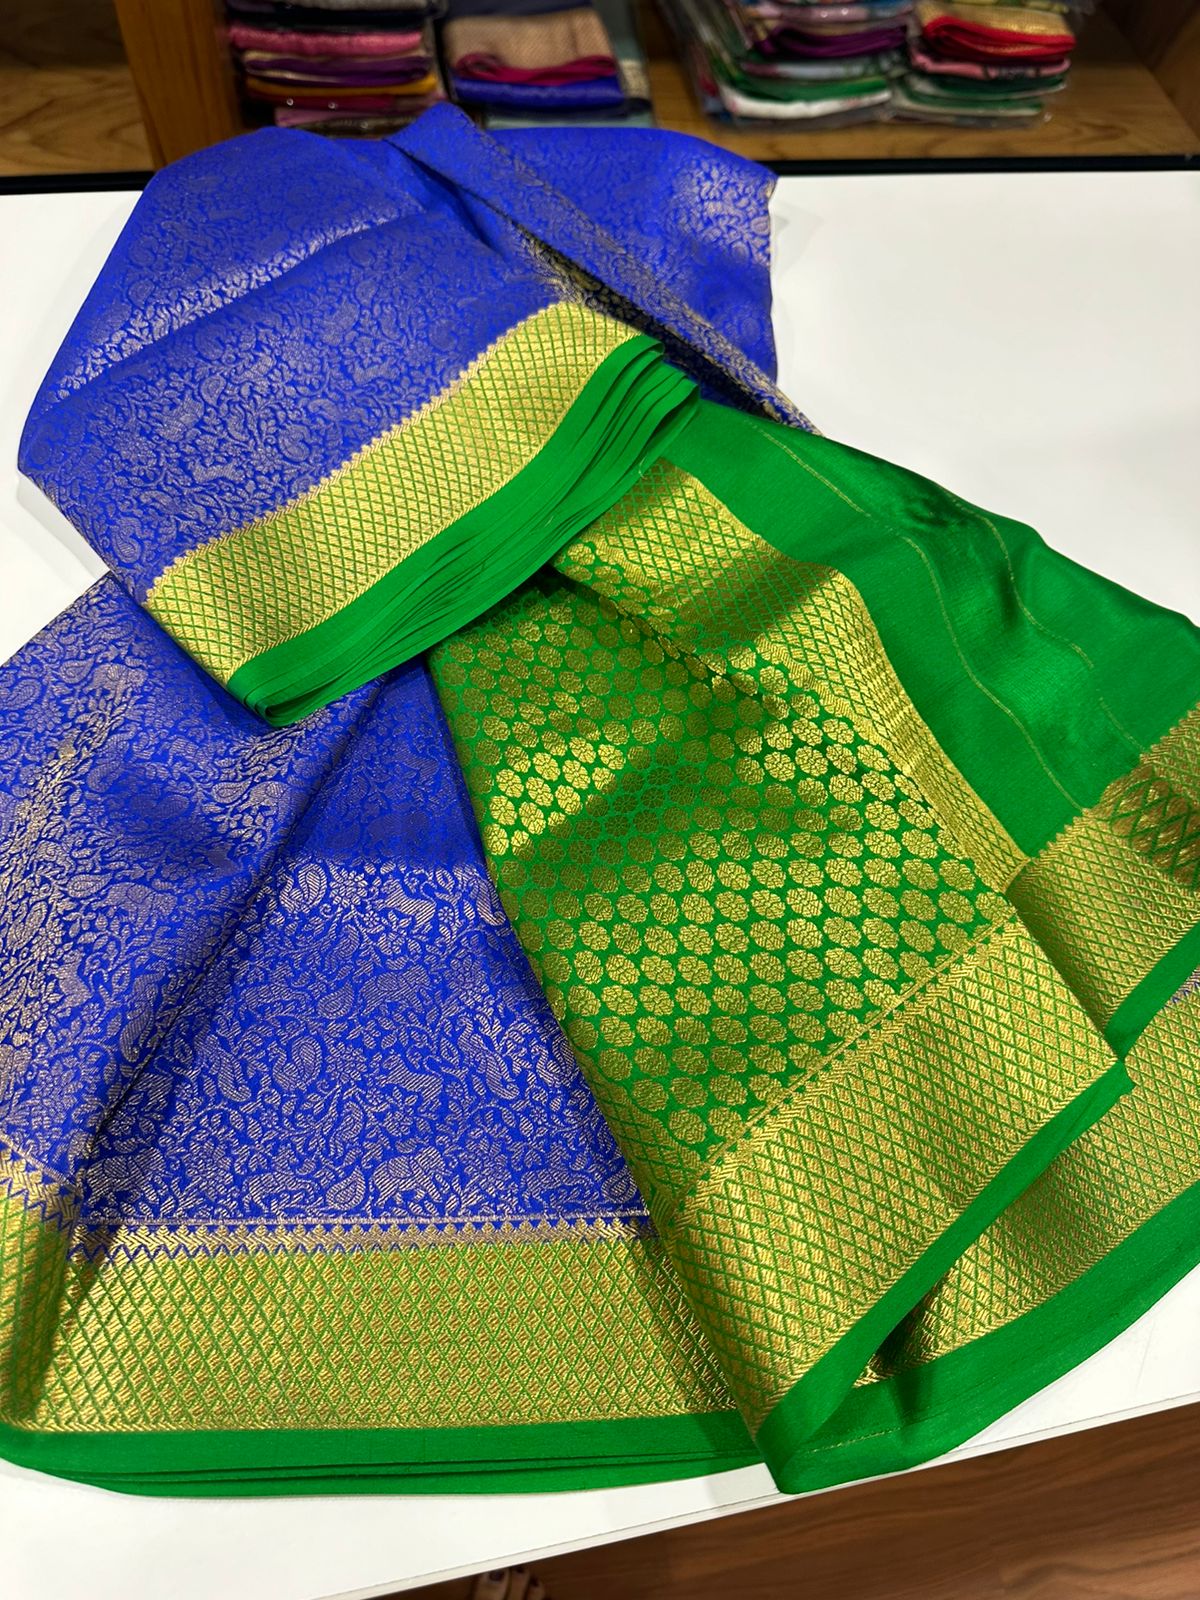 Pure brocade Mysore silk sarees with 120 grm thickness with rich pallu